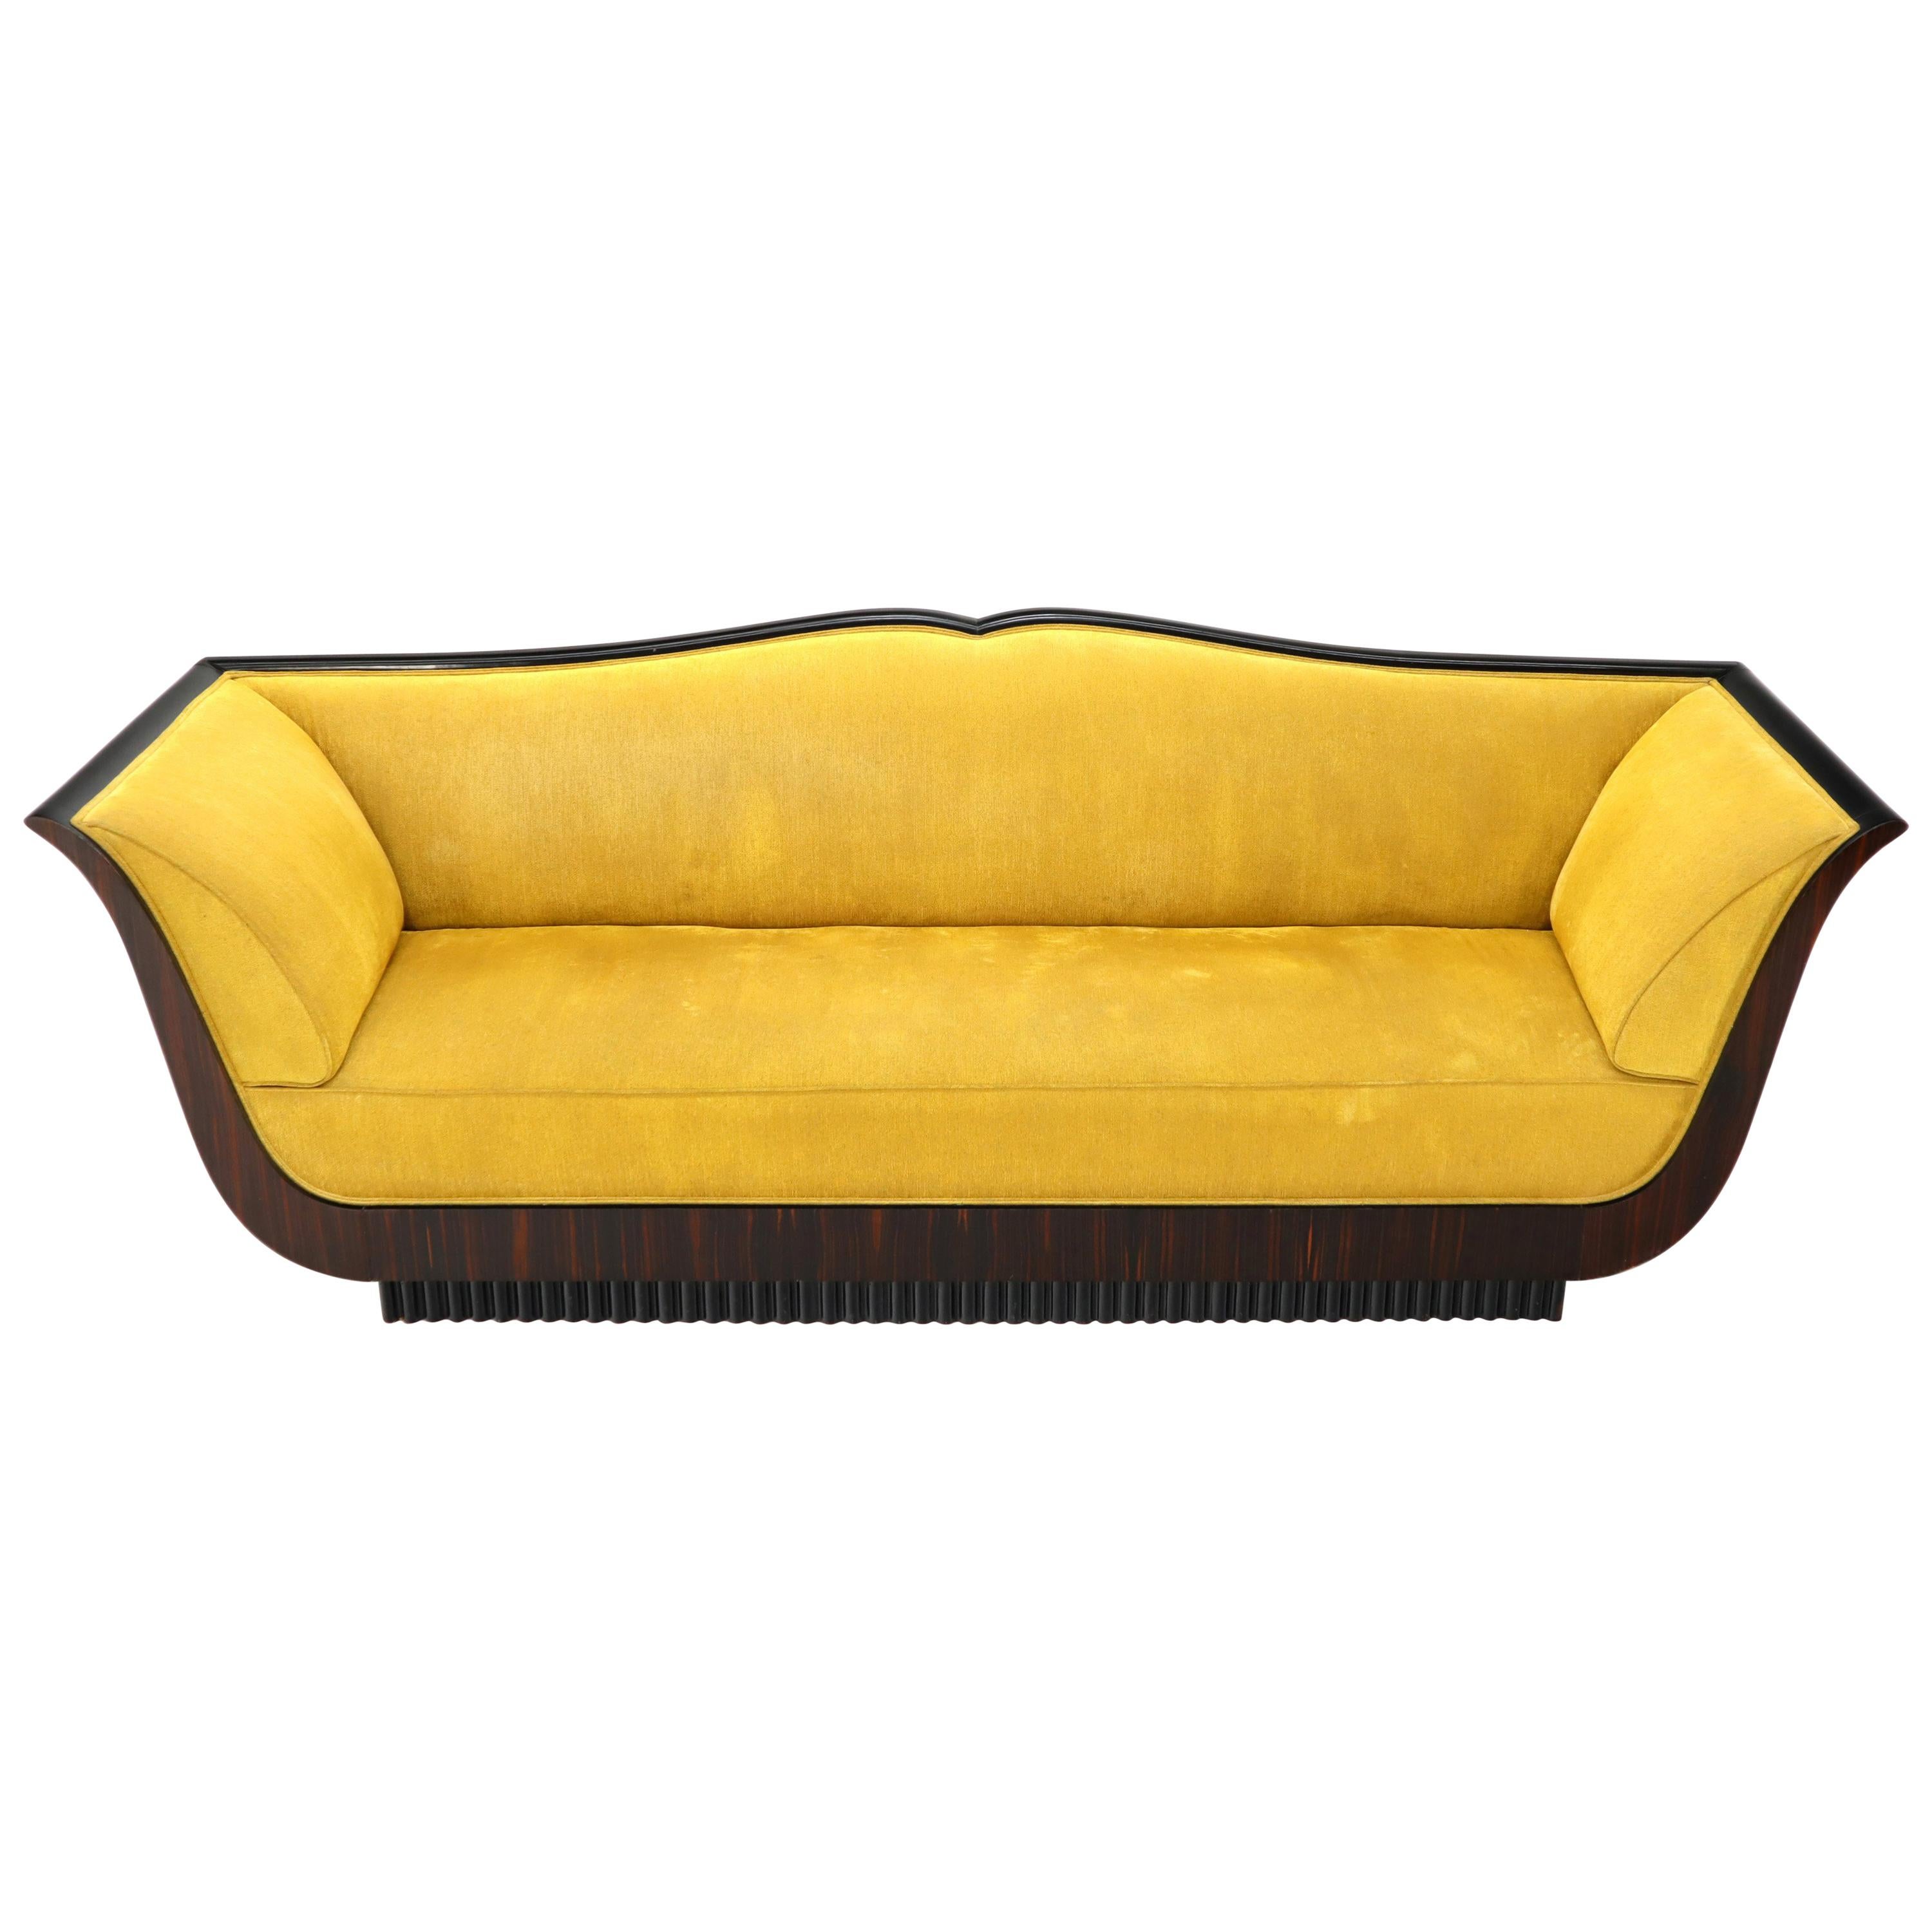 Large French Art Deco Rosewood Sofa in Gold Upholstery Scalloped Edge For Sale